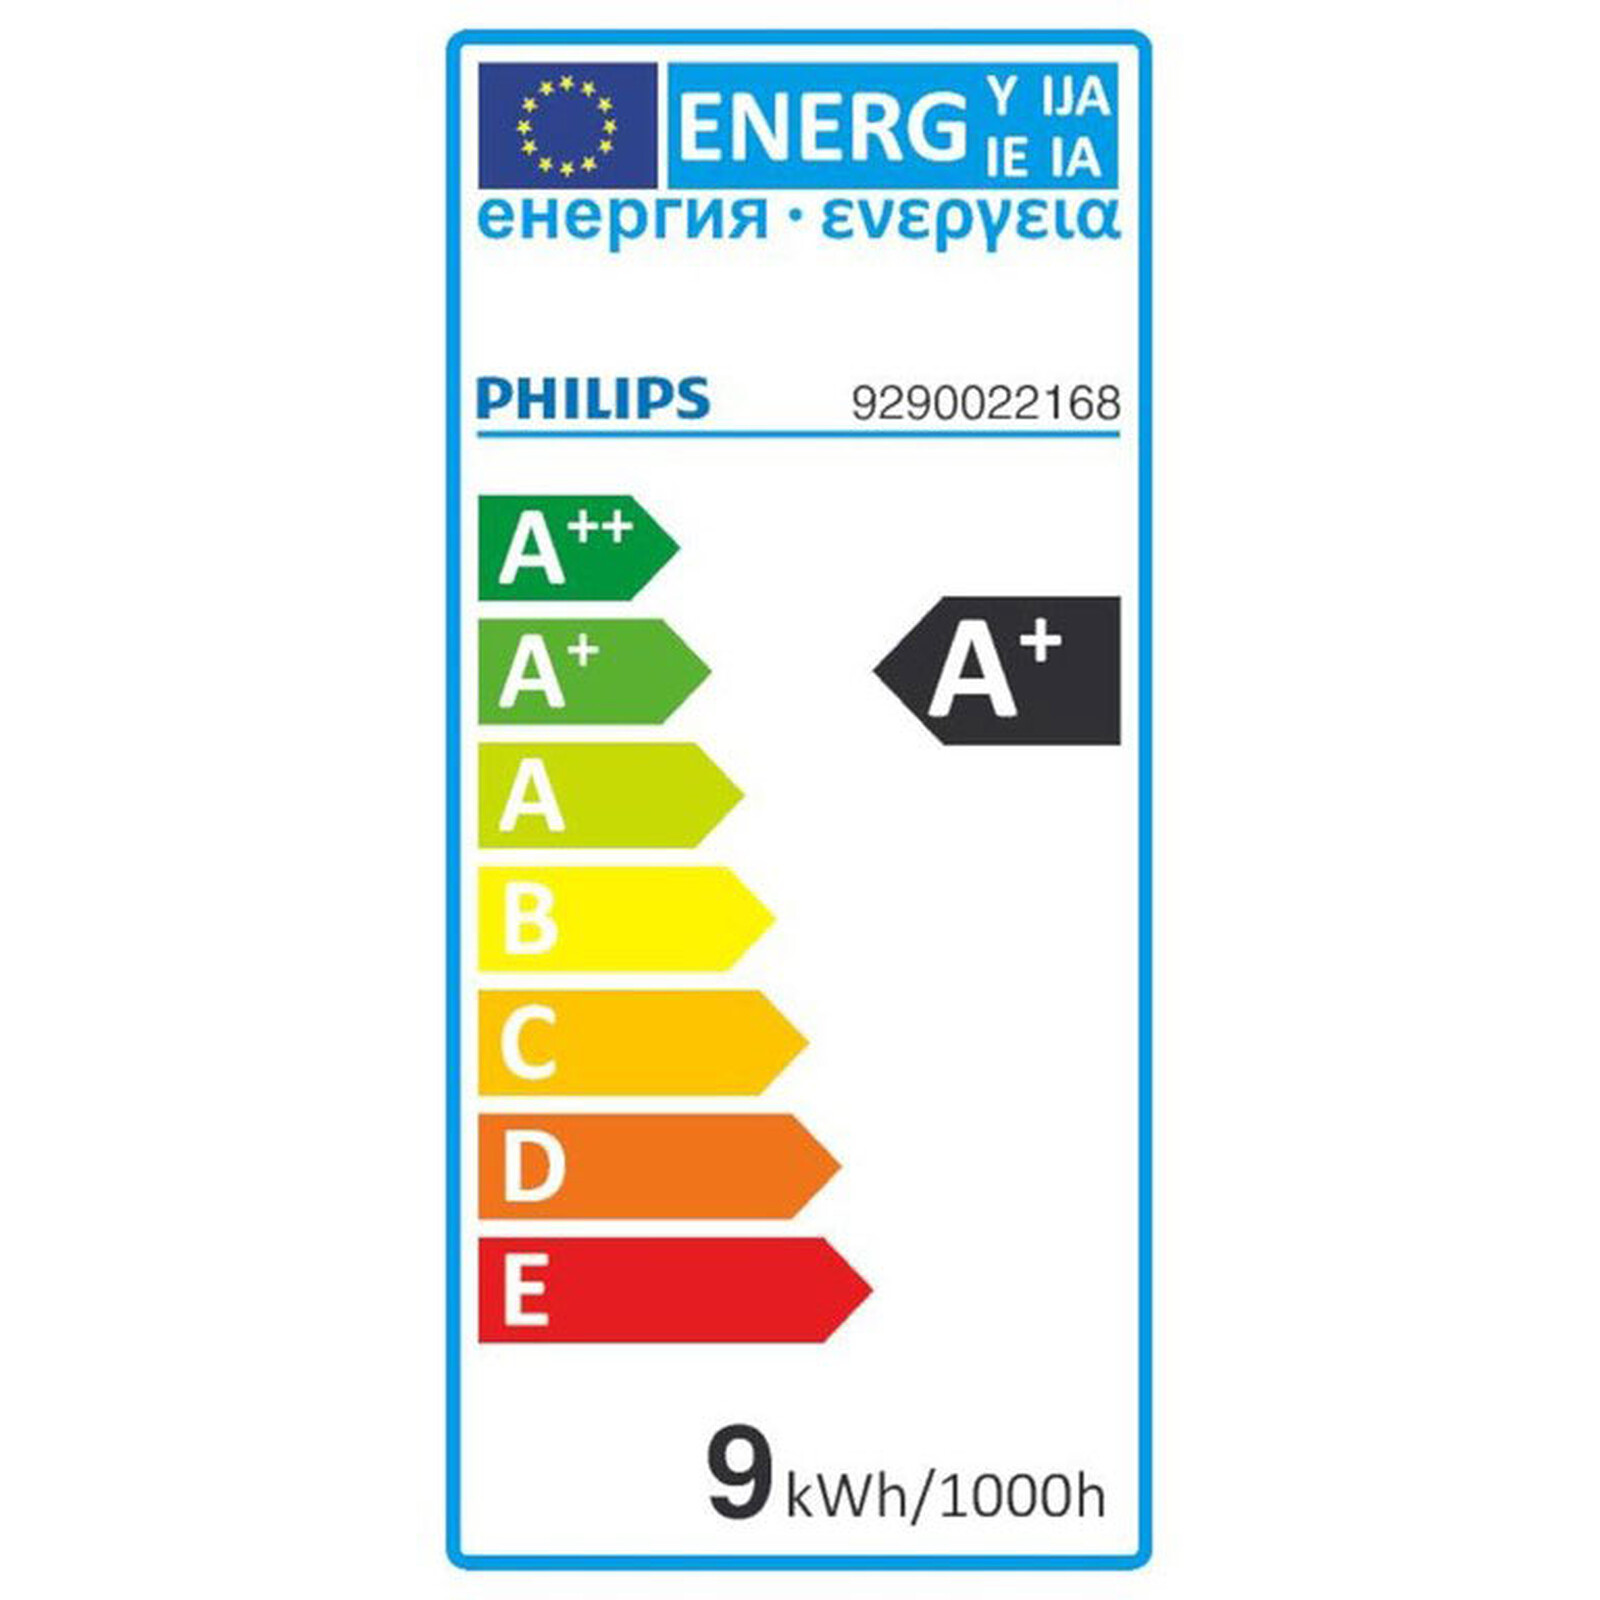 Philips Hue White & Color Ambiance E27 Bluetooth - light bulb Philips on LDLC